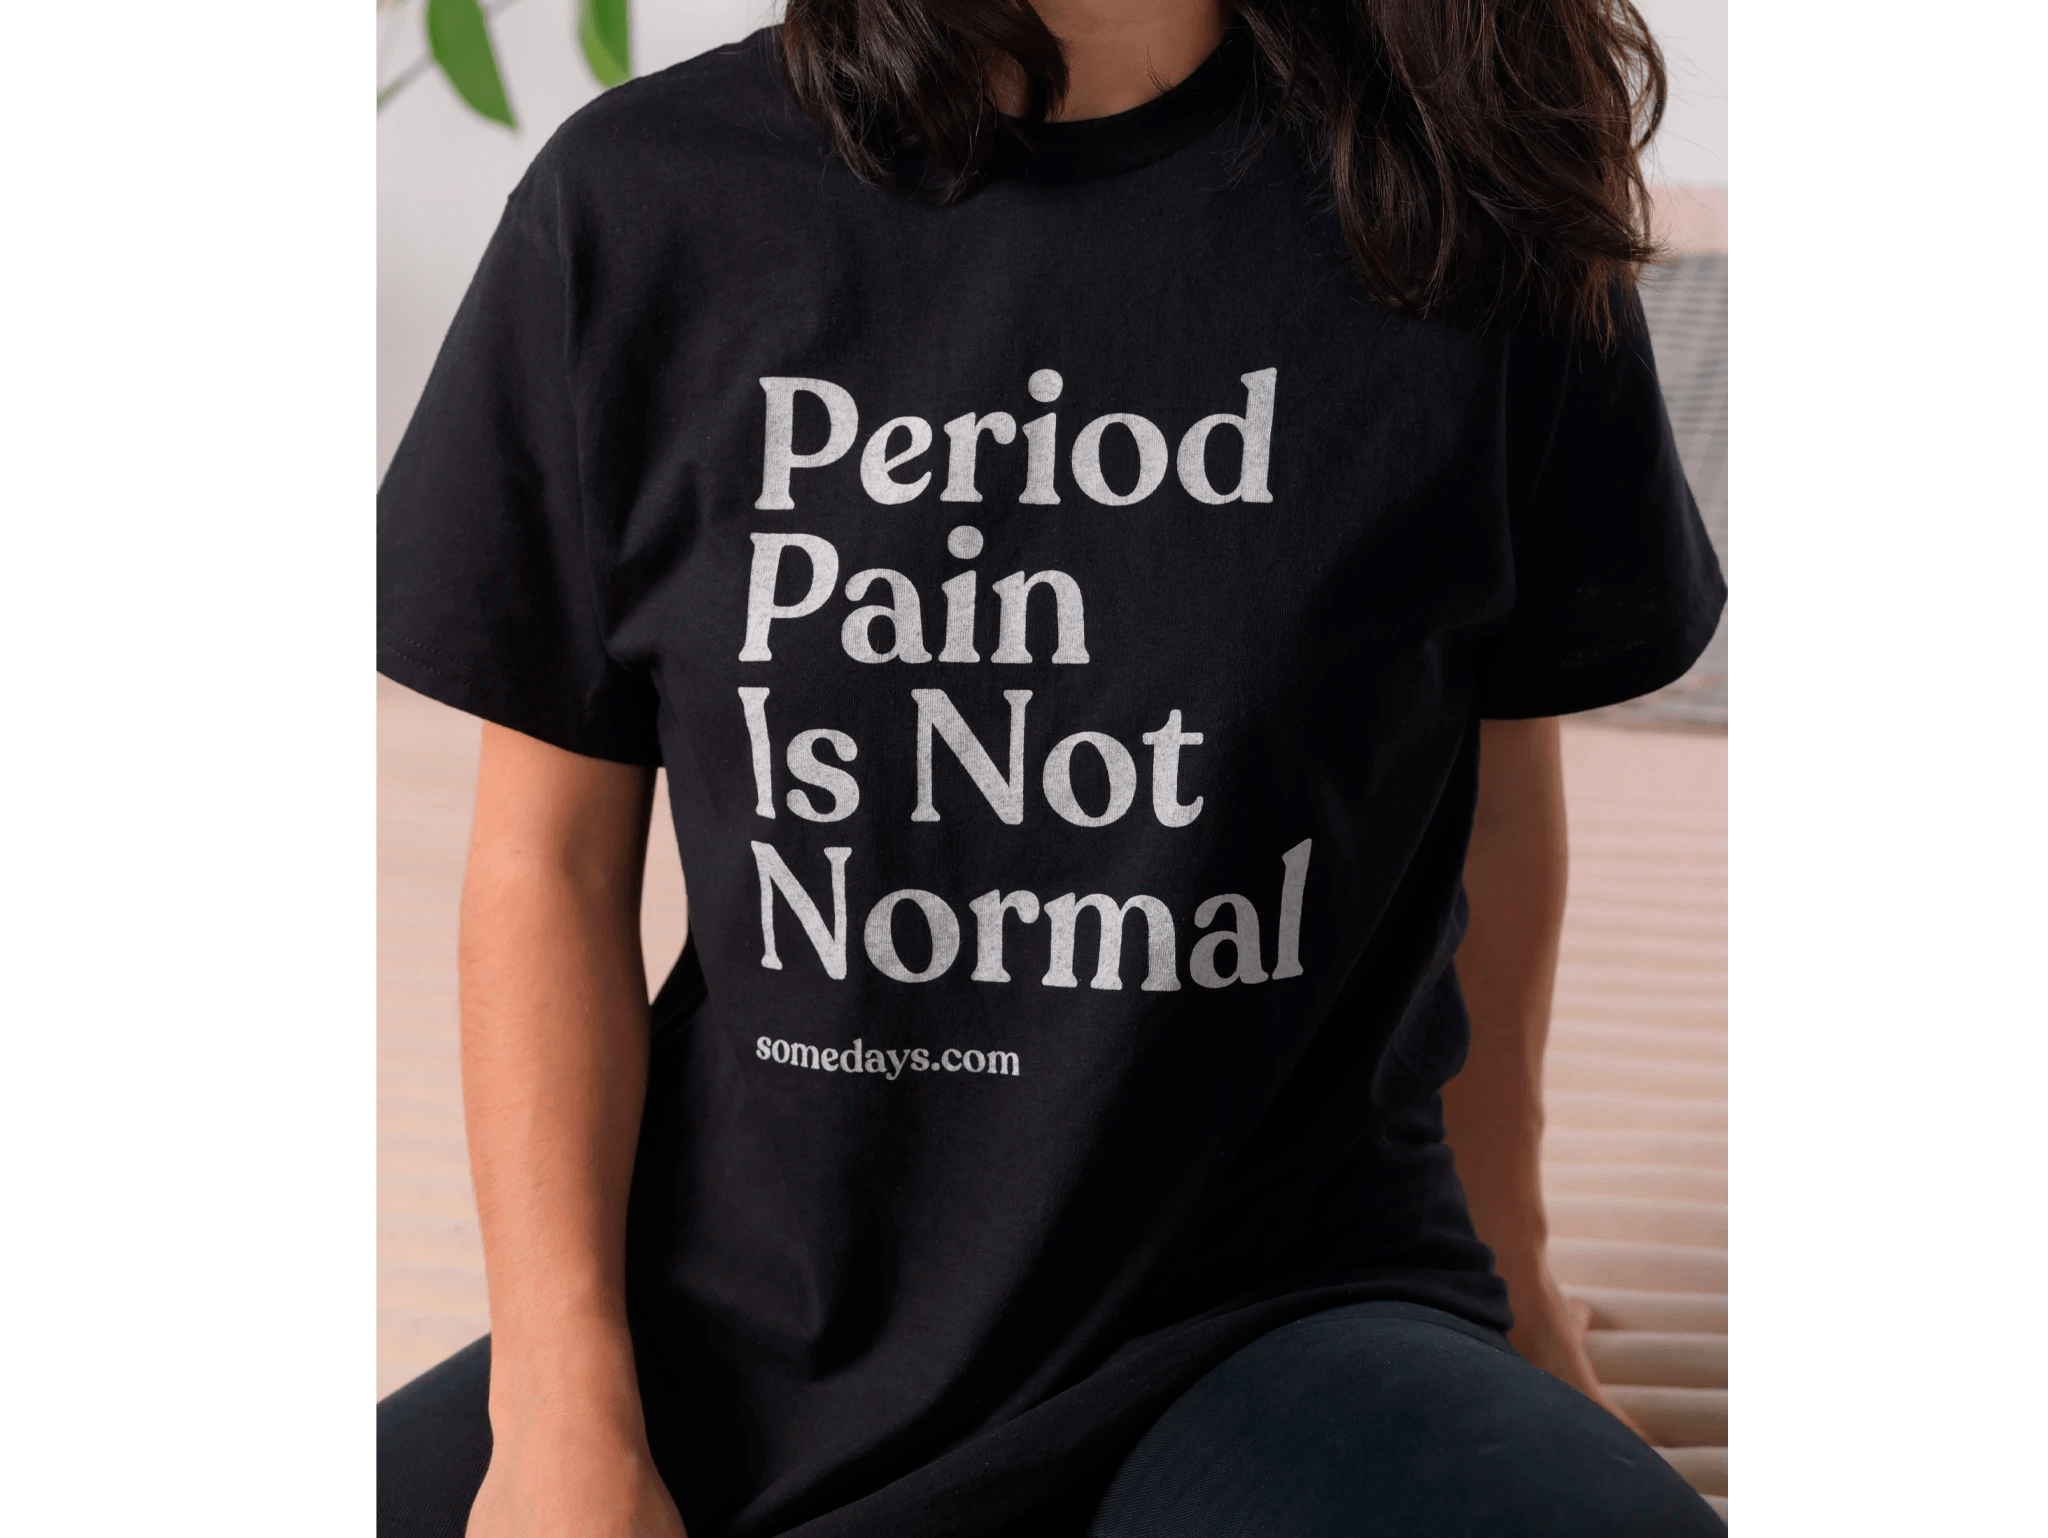 Menstrual Cramps Are Common, But Not Normal